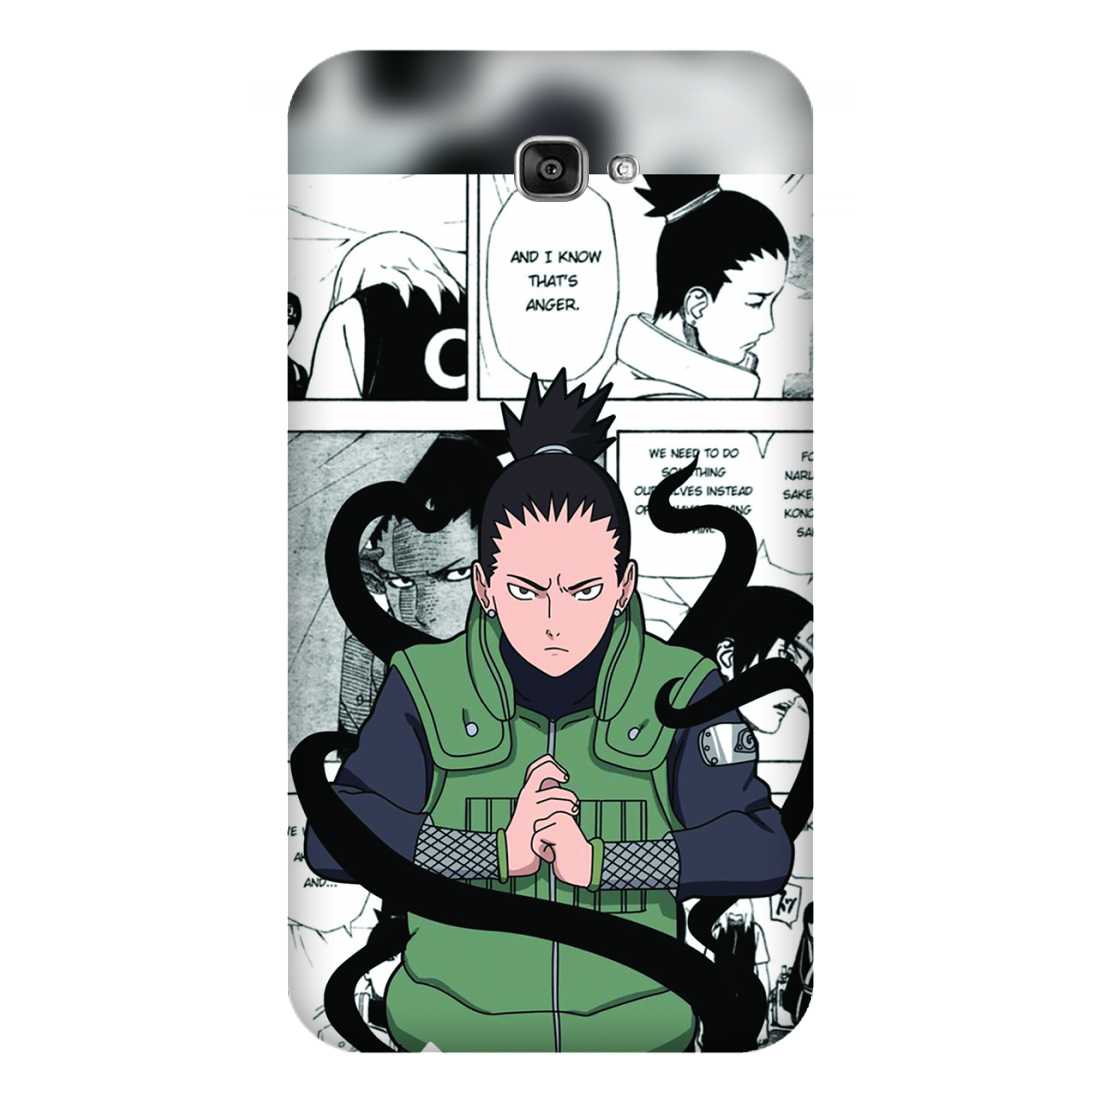 Manga Scene with Blurred Faces Case Samsung Galaxy J7 Prime